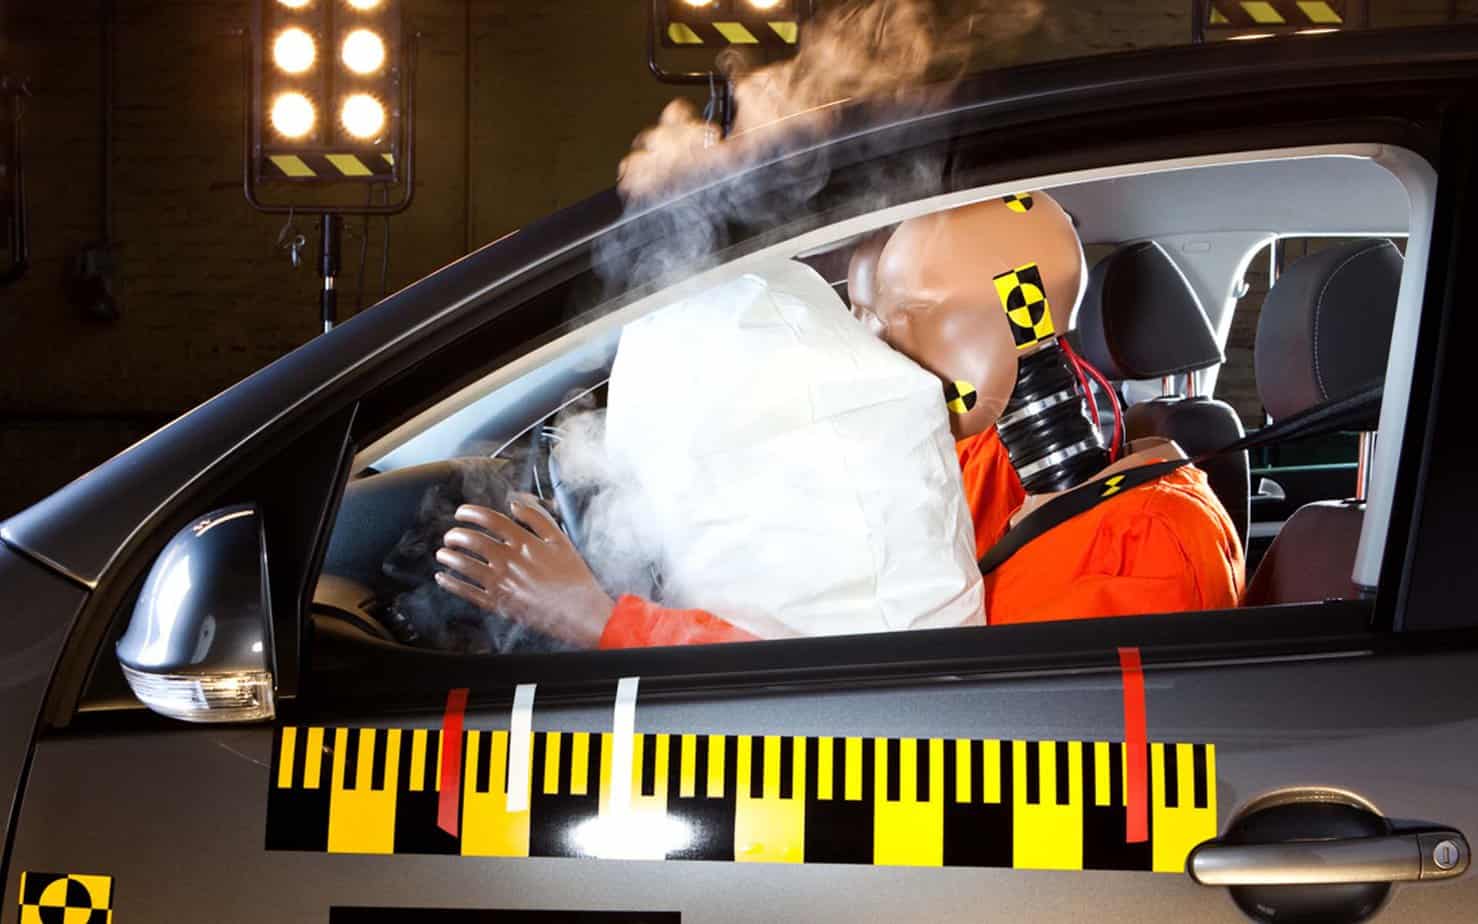 73% Of Women Are More Likely To Die In Car Crashes As Tested On Female Dummy